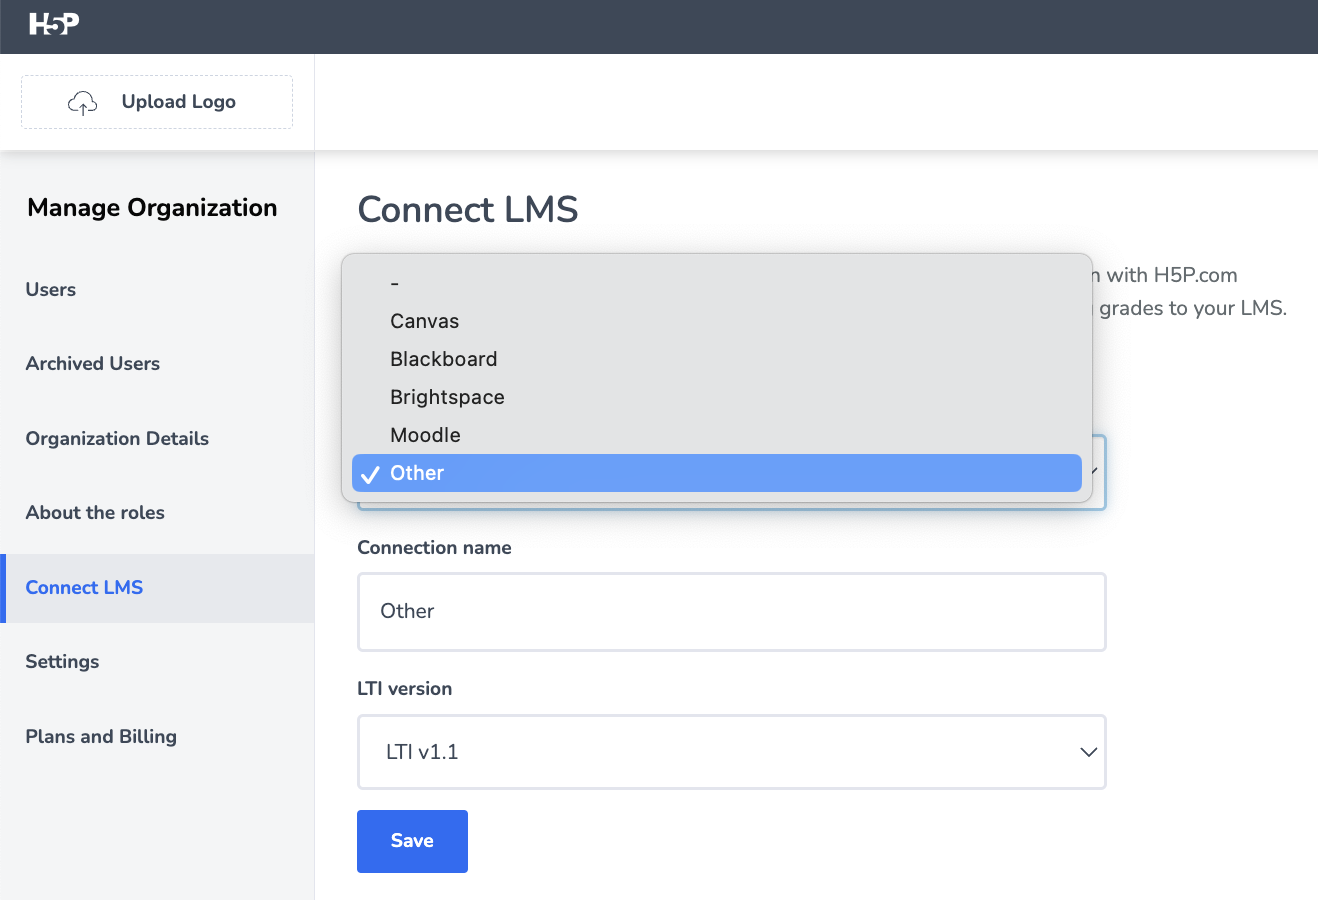 Integrate with the LMS of your choice or use LTI integrations